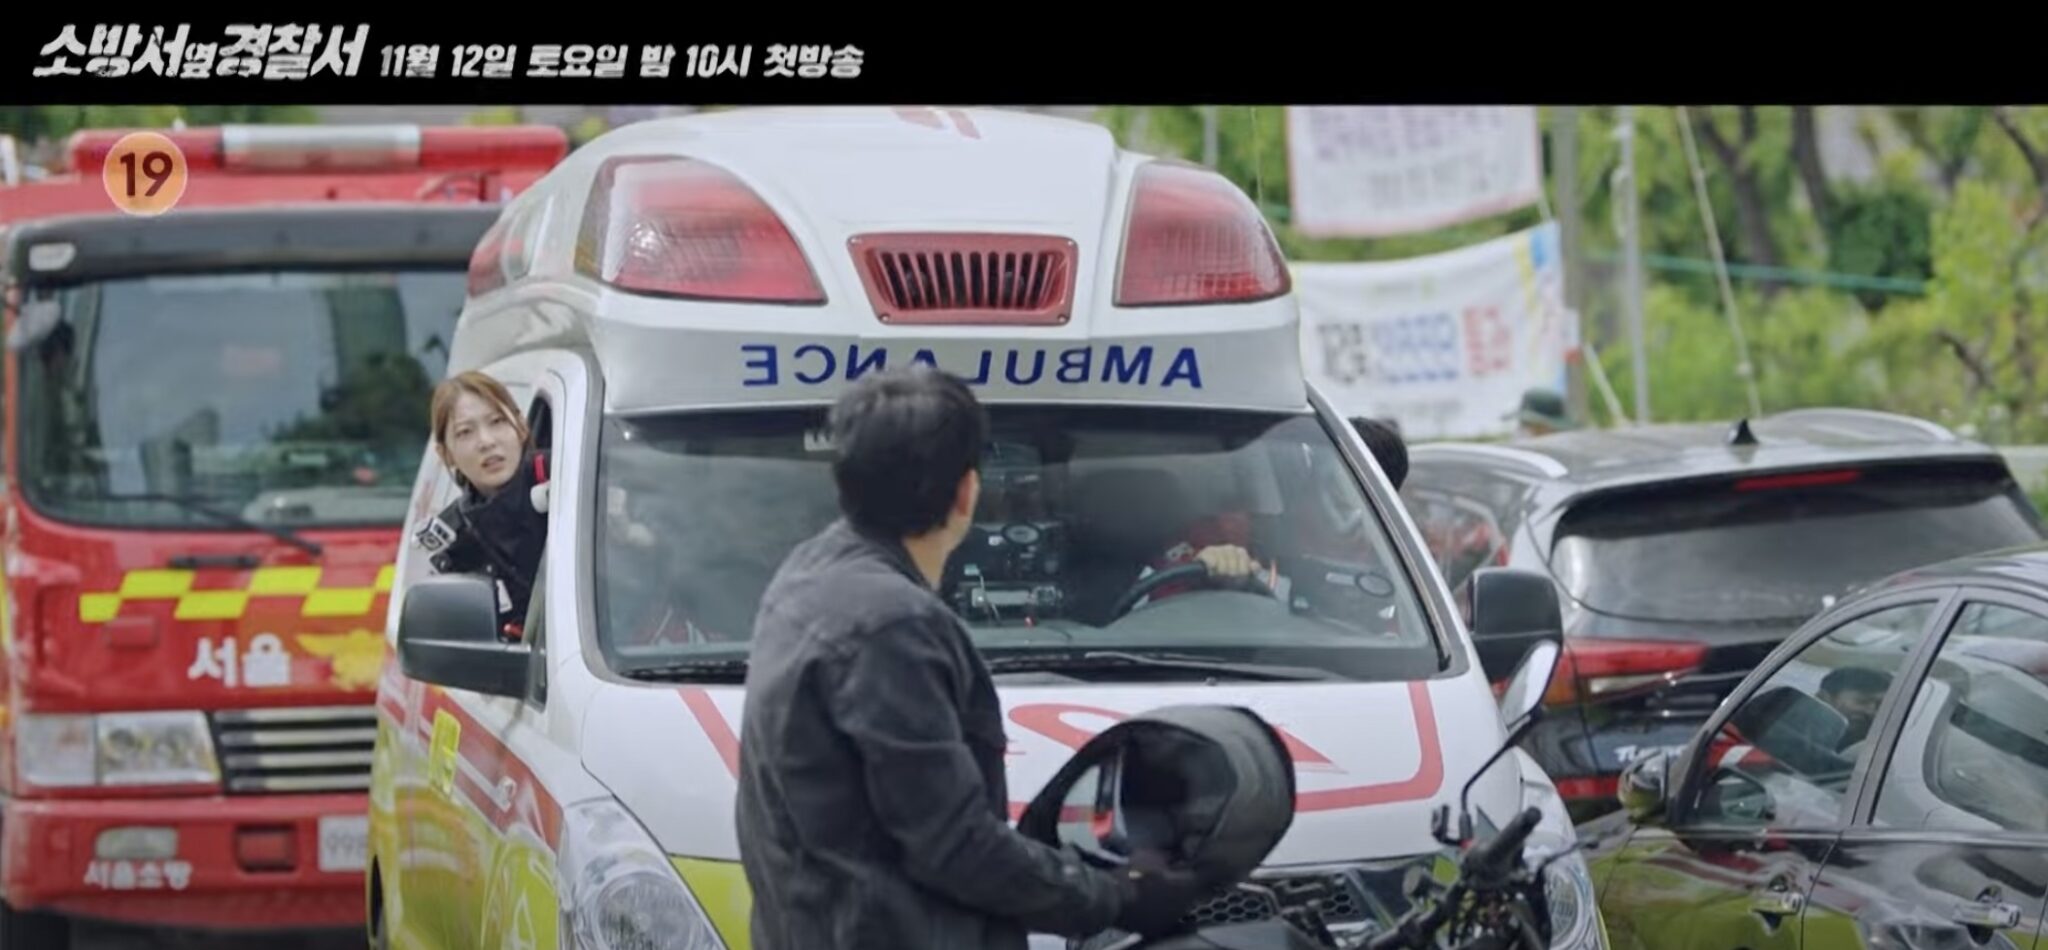 The First Responders come to the rescue in new teaser